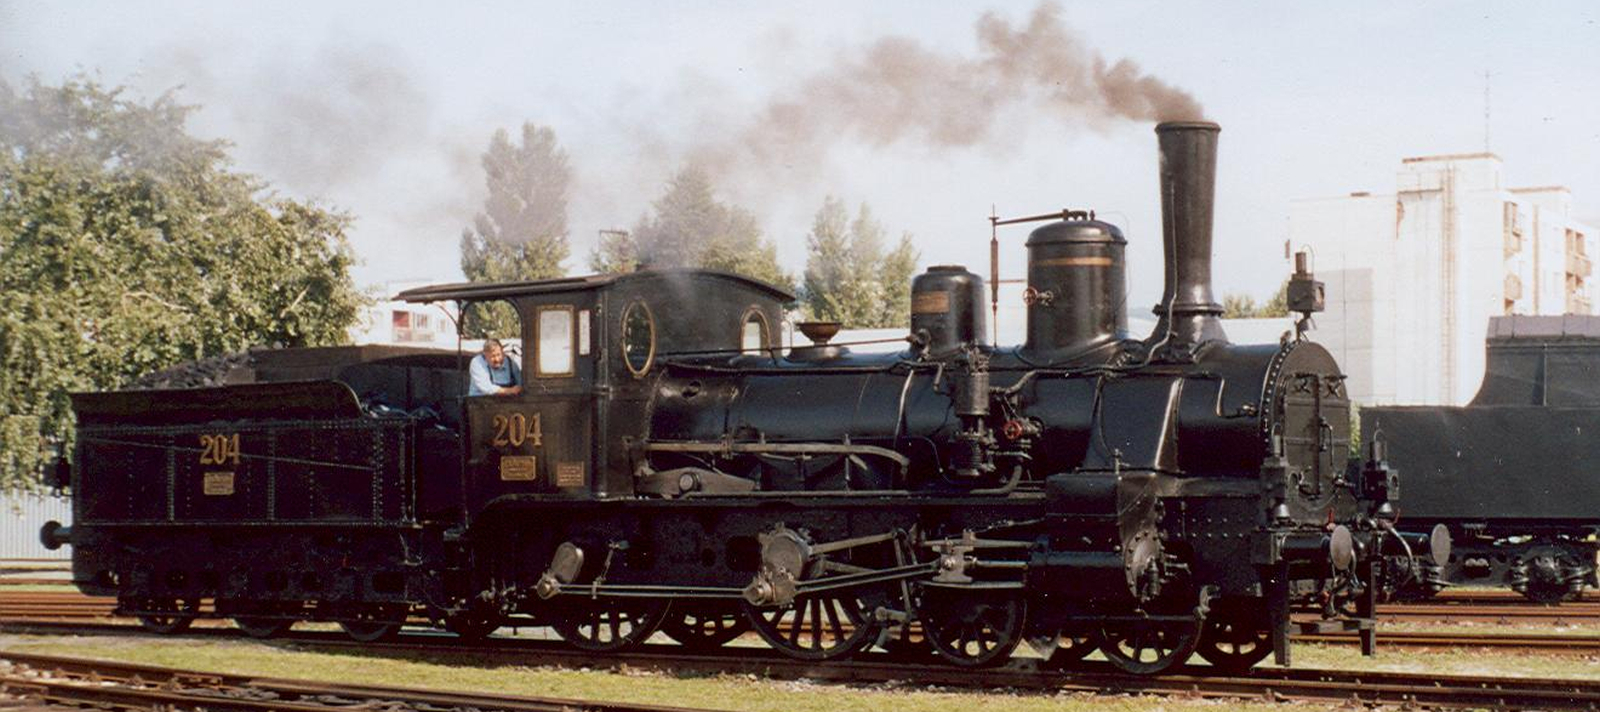 220.194 originally numbered as No. 204 at an exhibition in Bratislava Vychod